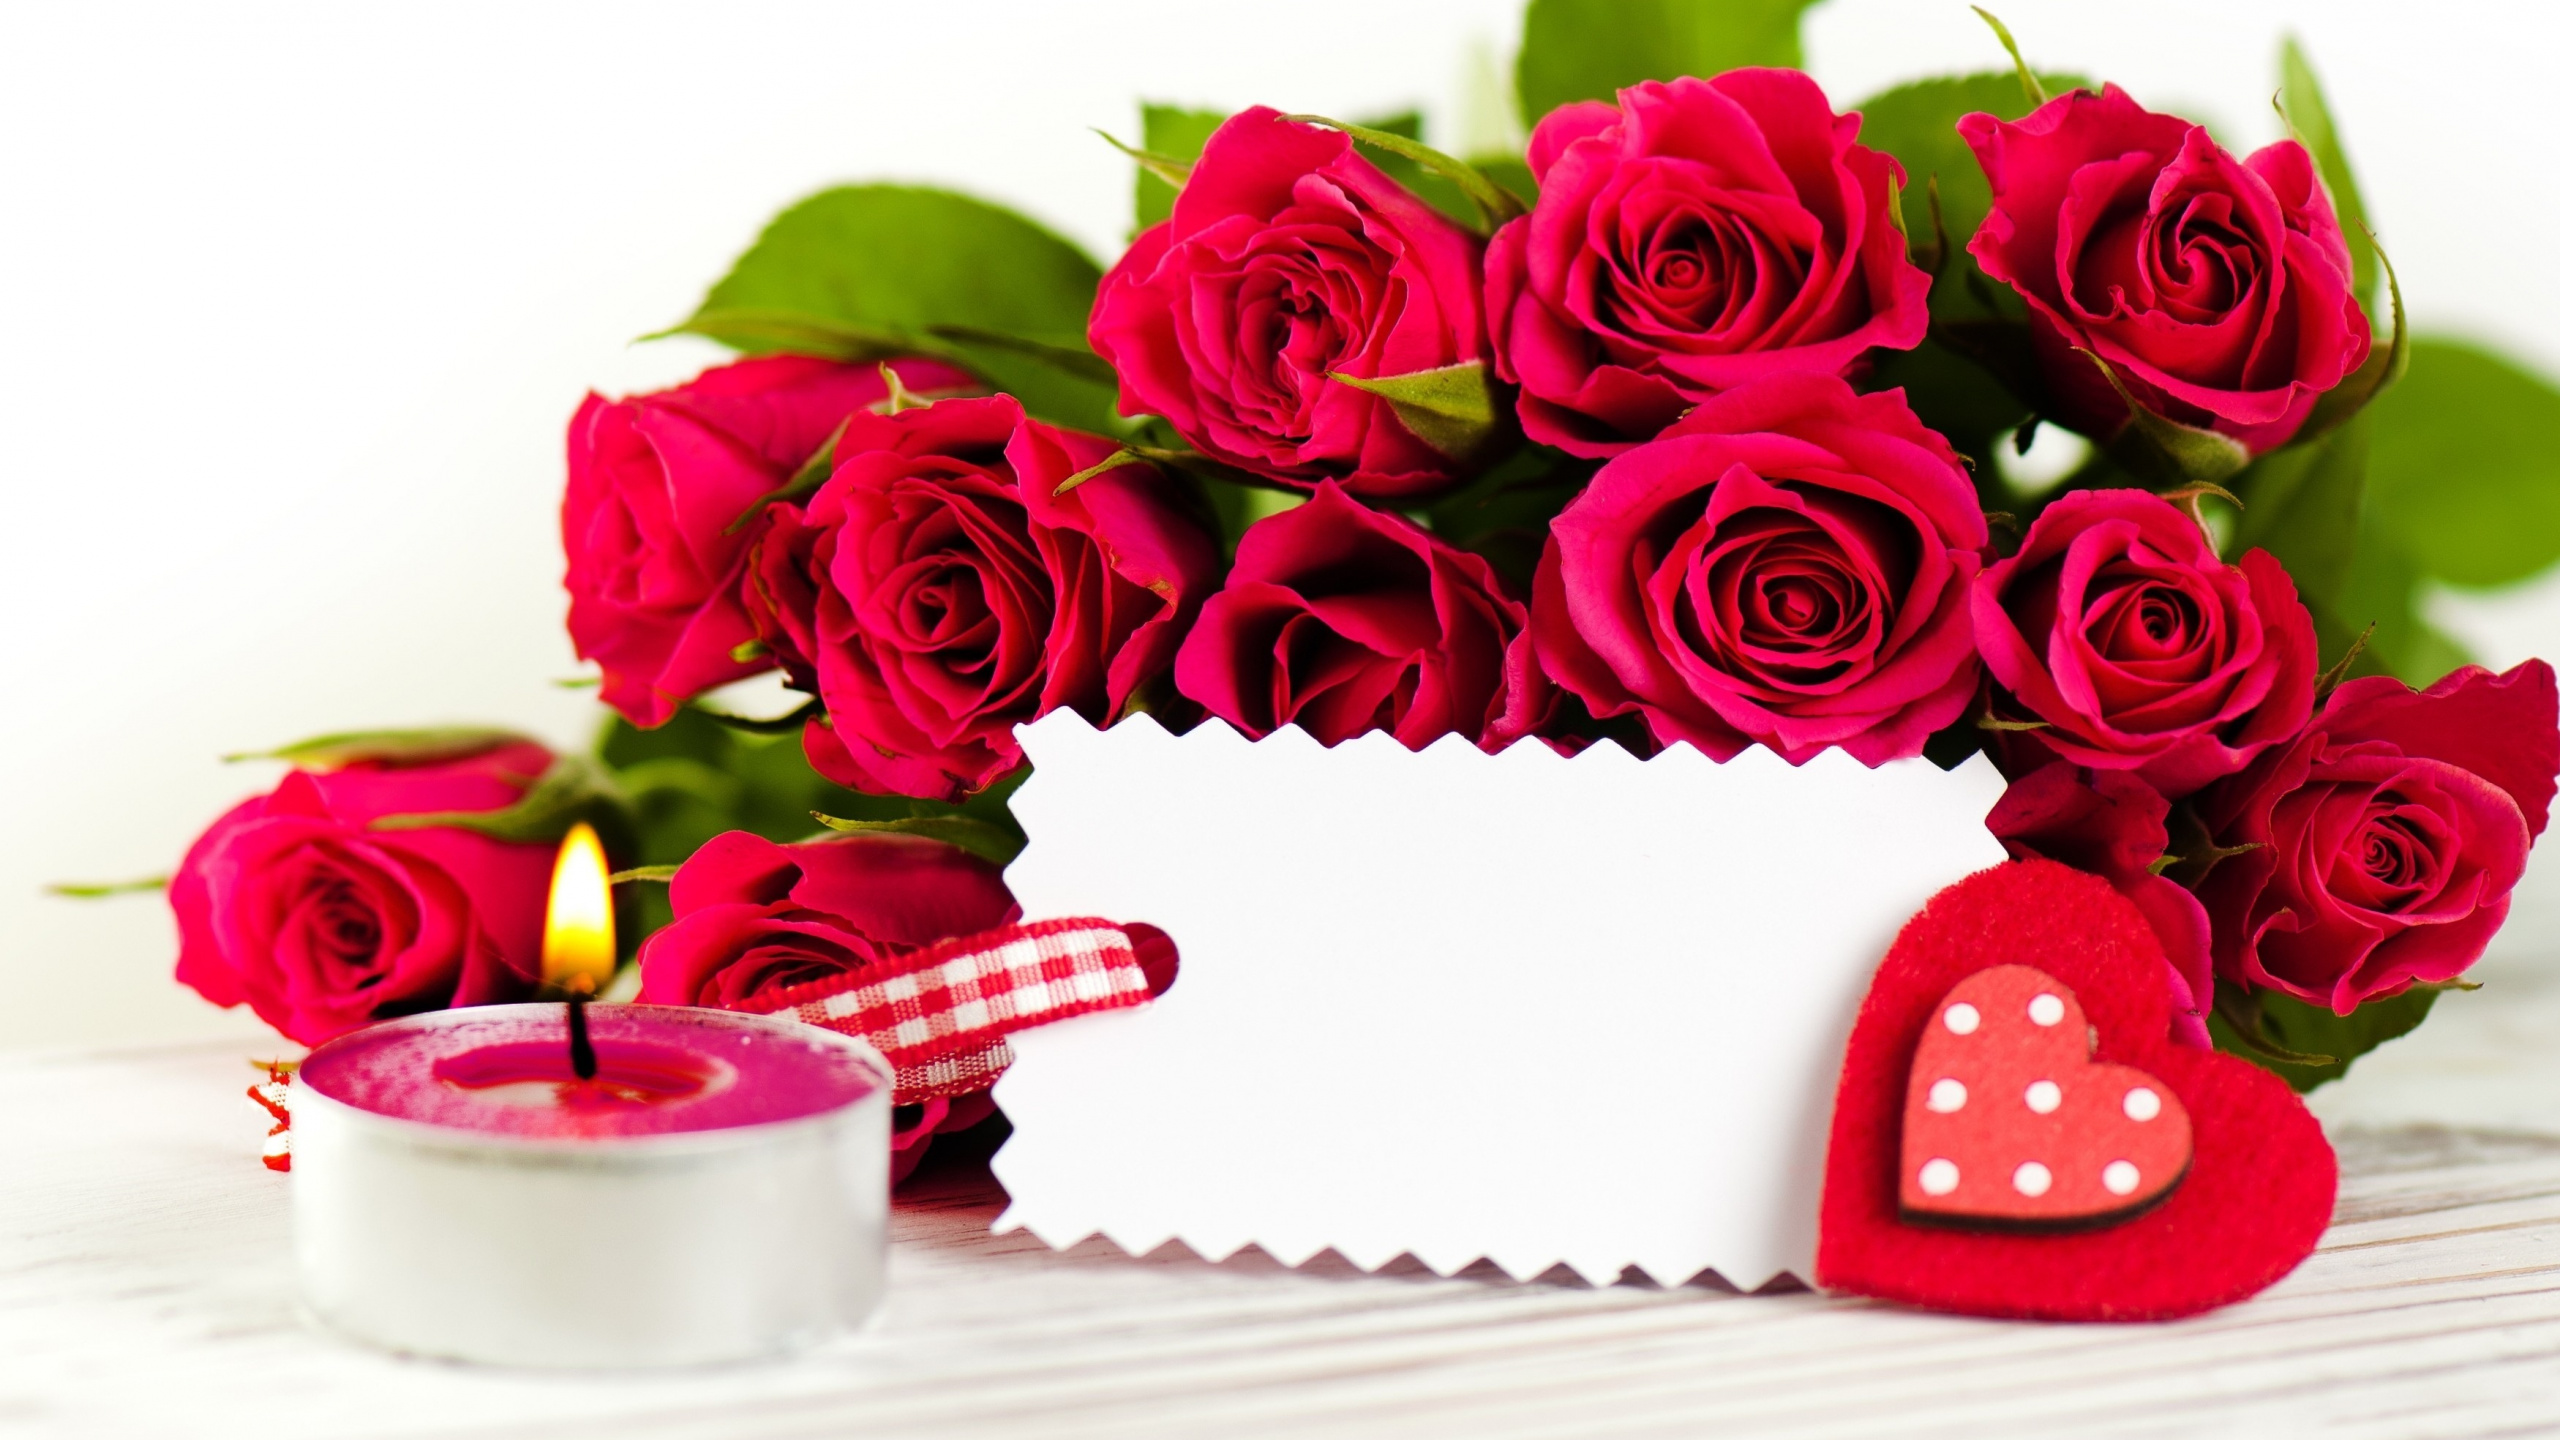 Red Roses on White Book Page. Wallpaper in 2560x1440 Resolution